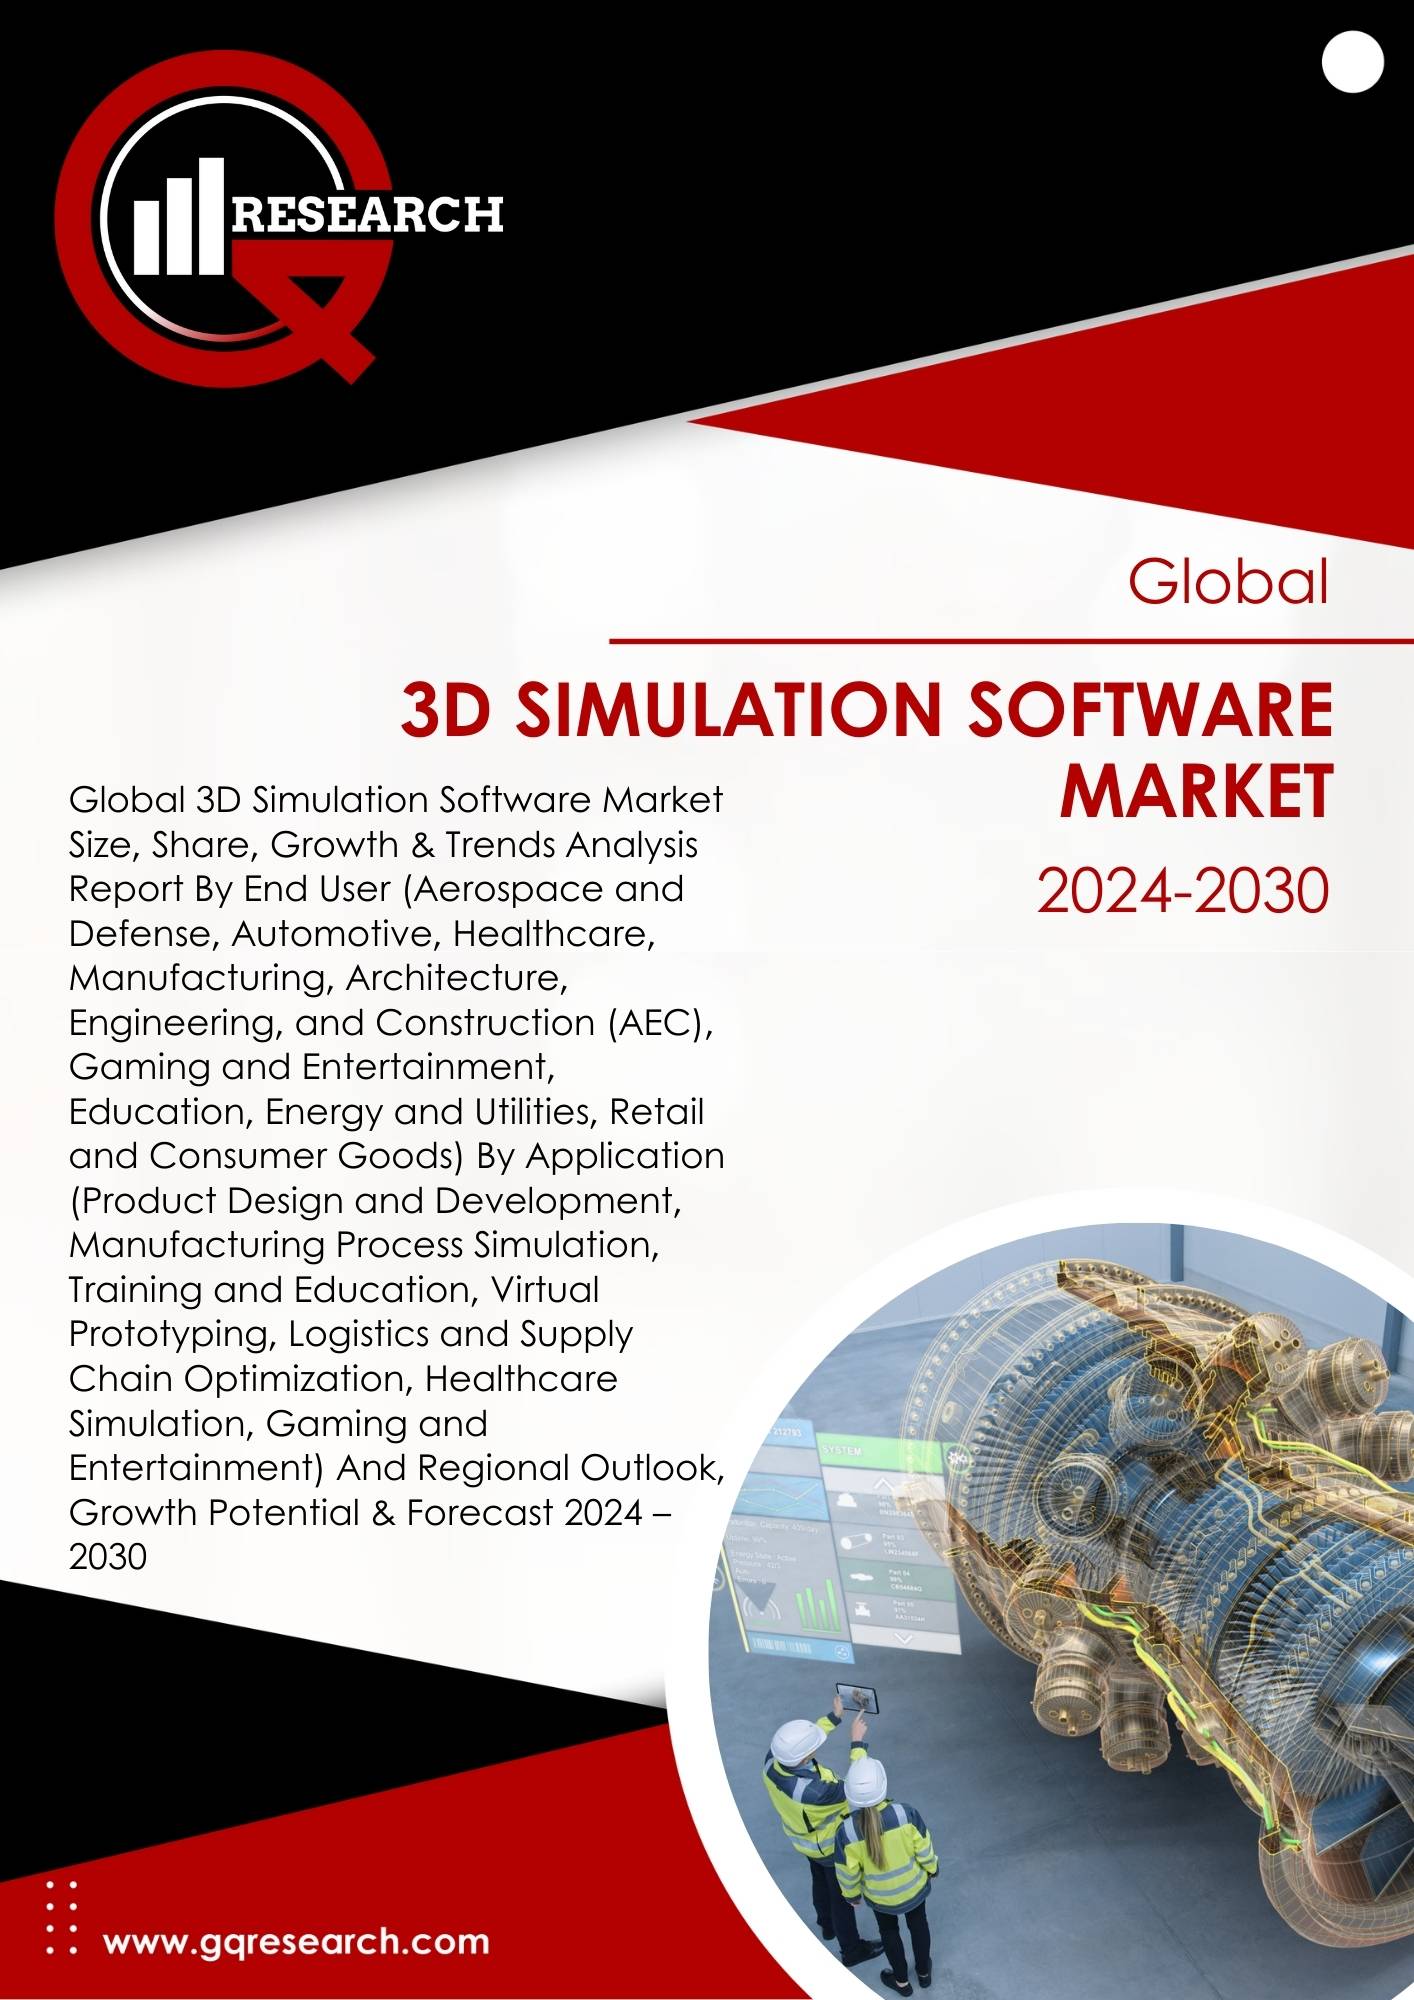 3D Simulation Software Market Growth, Size, Share and Forecast to 2030 | GQ Research